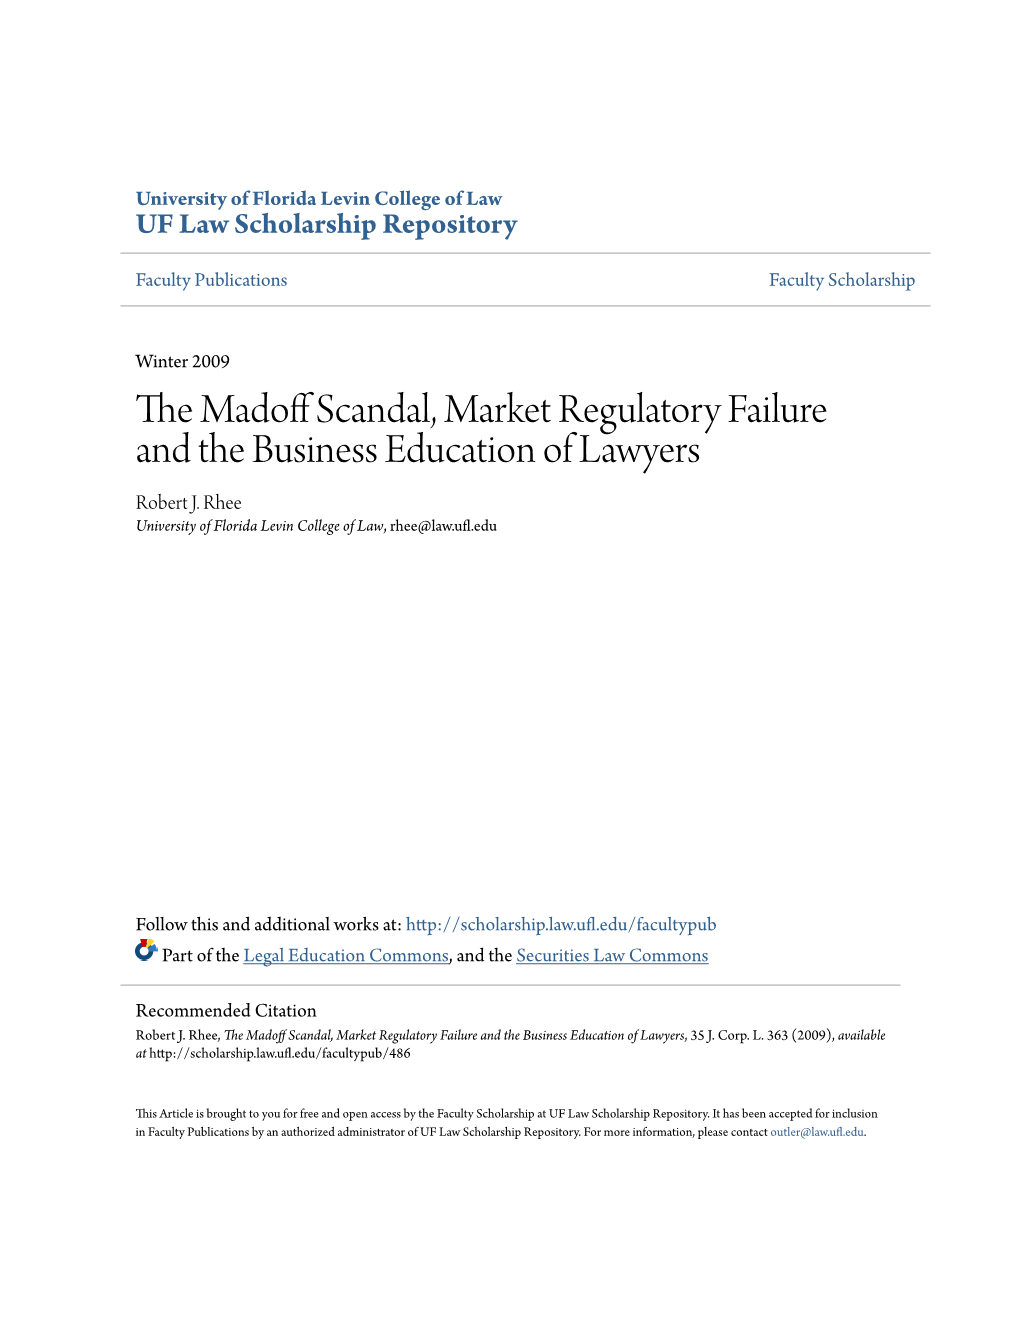 The Madoff Scandal, Market Regulatory Failure and the Business Education of Lawyers, 35 J